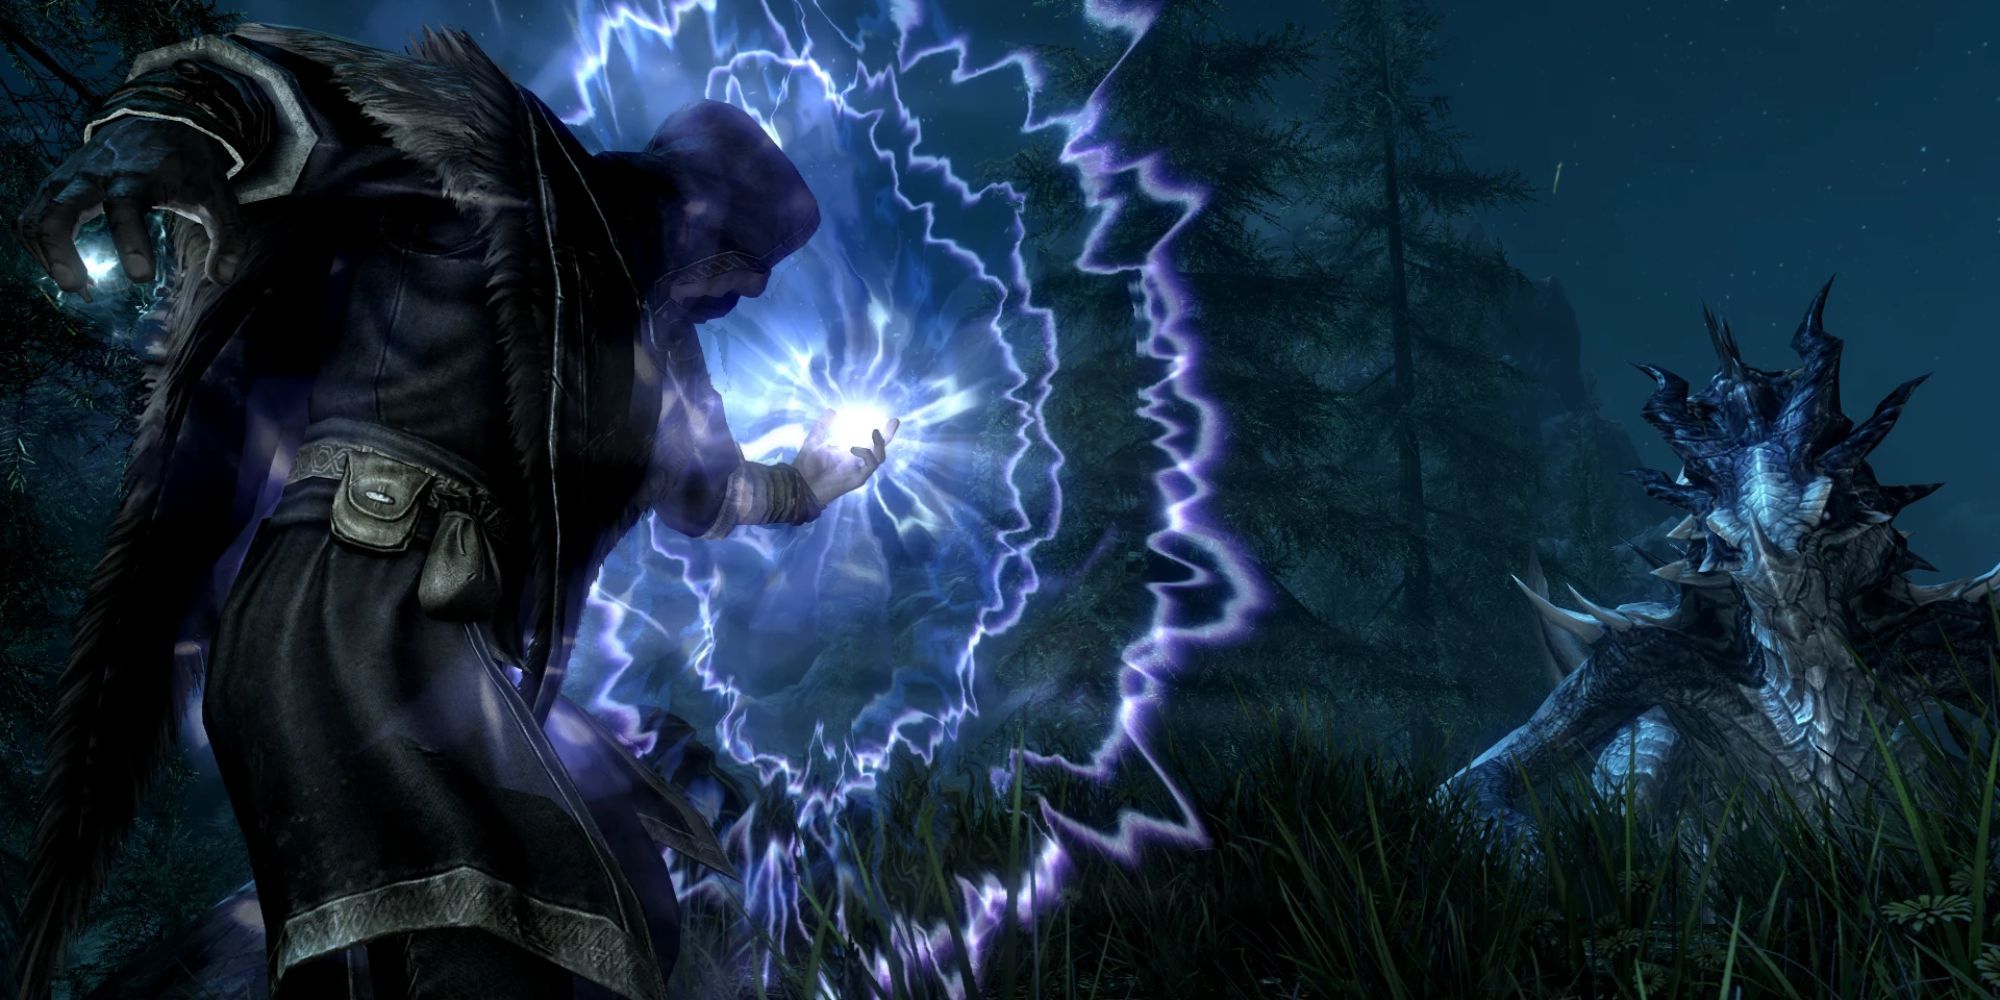 An archmage casts a blue ward brimming with energy to defend against a dragon.